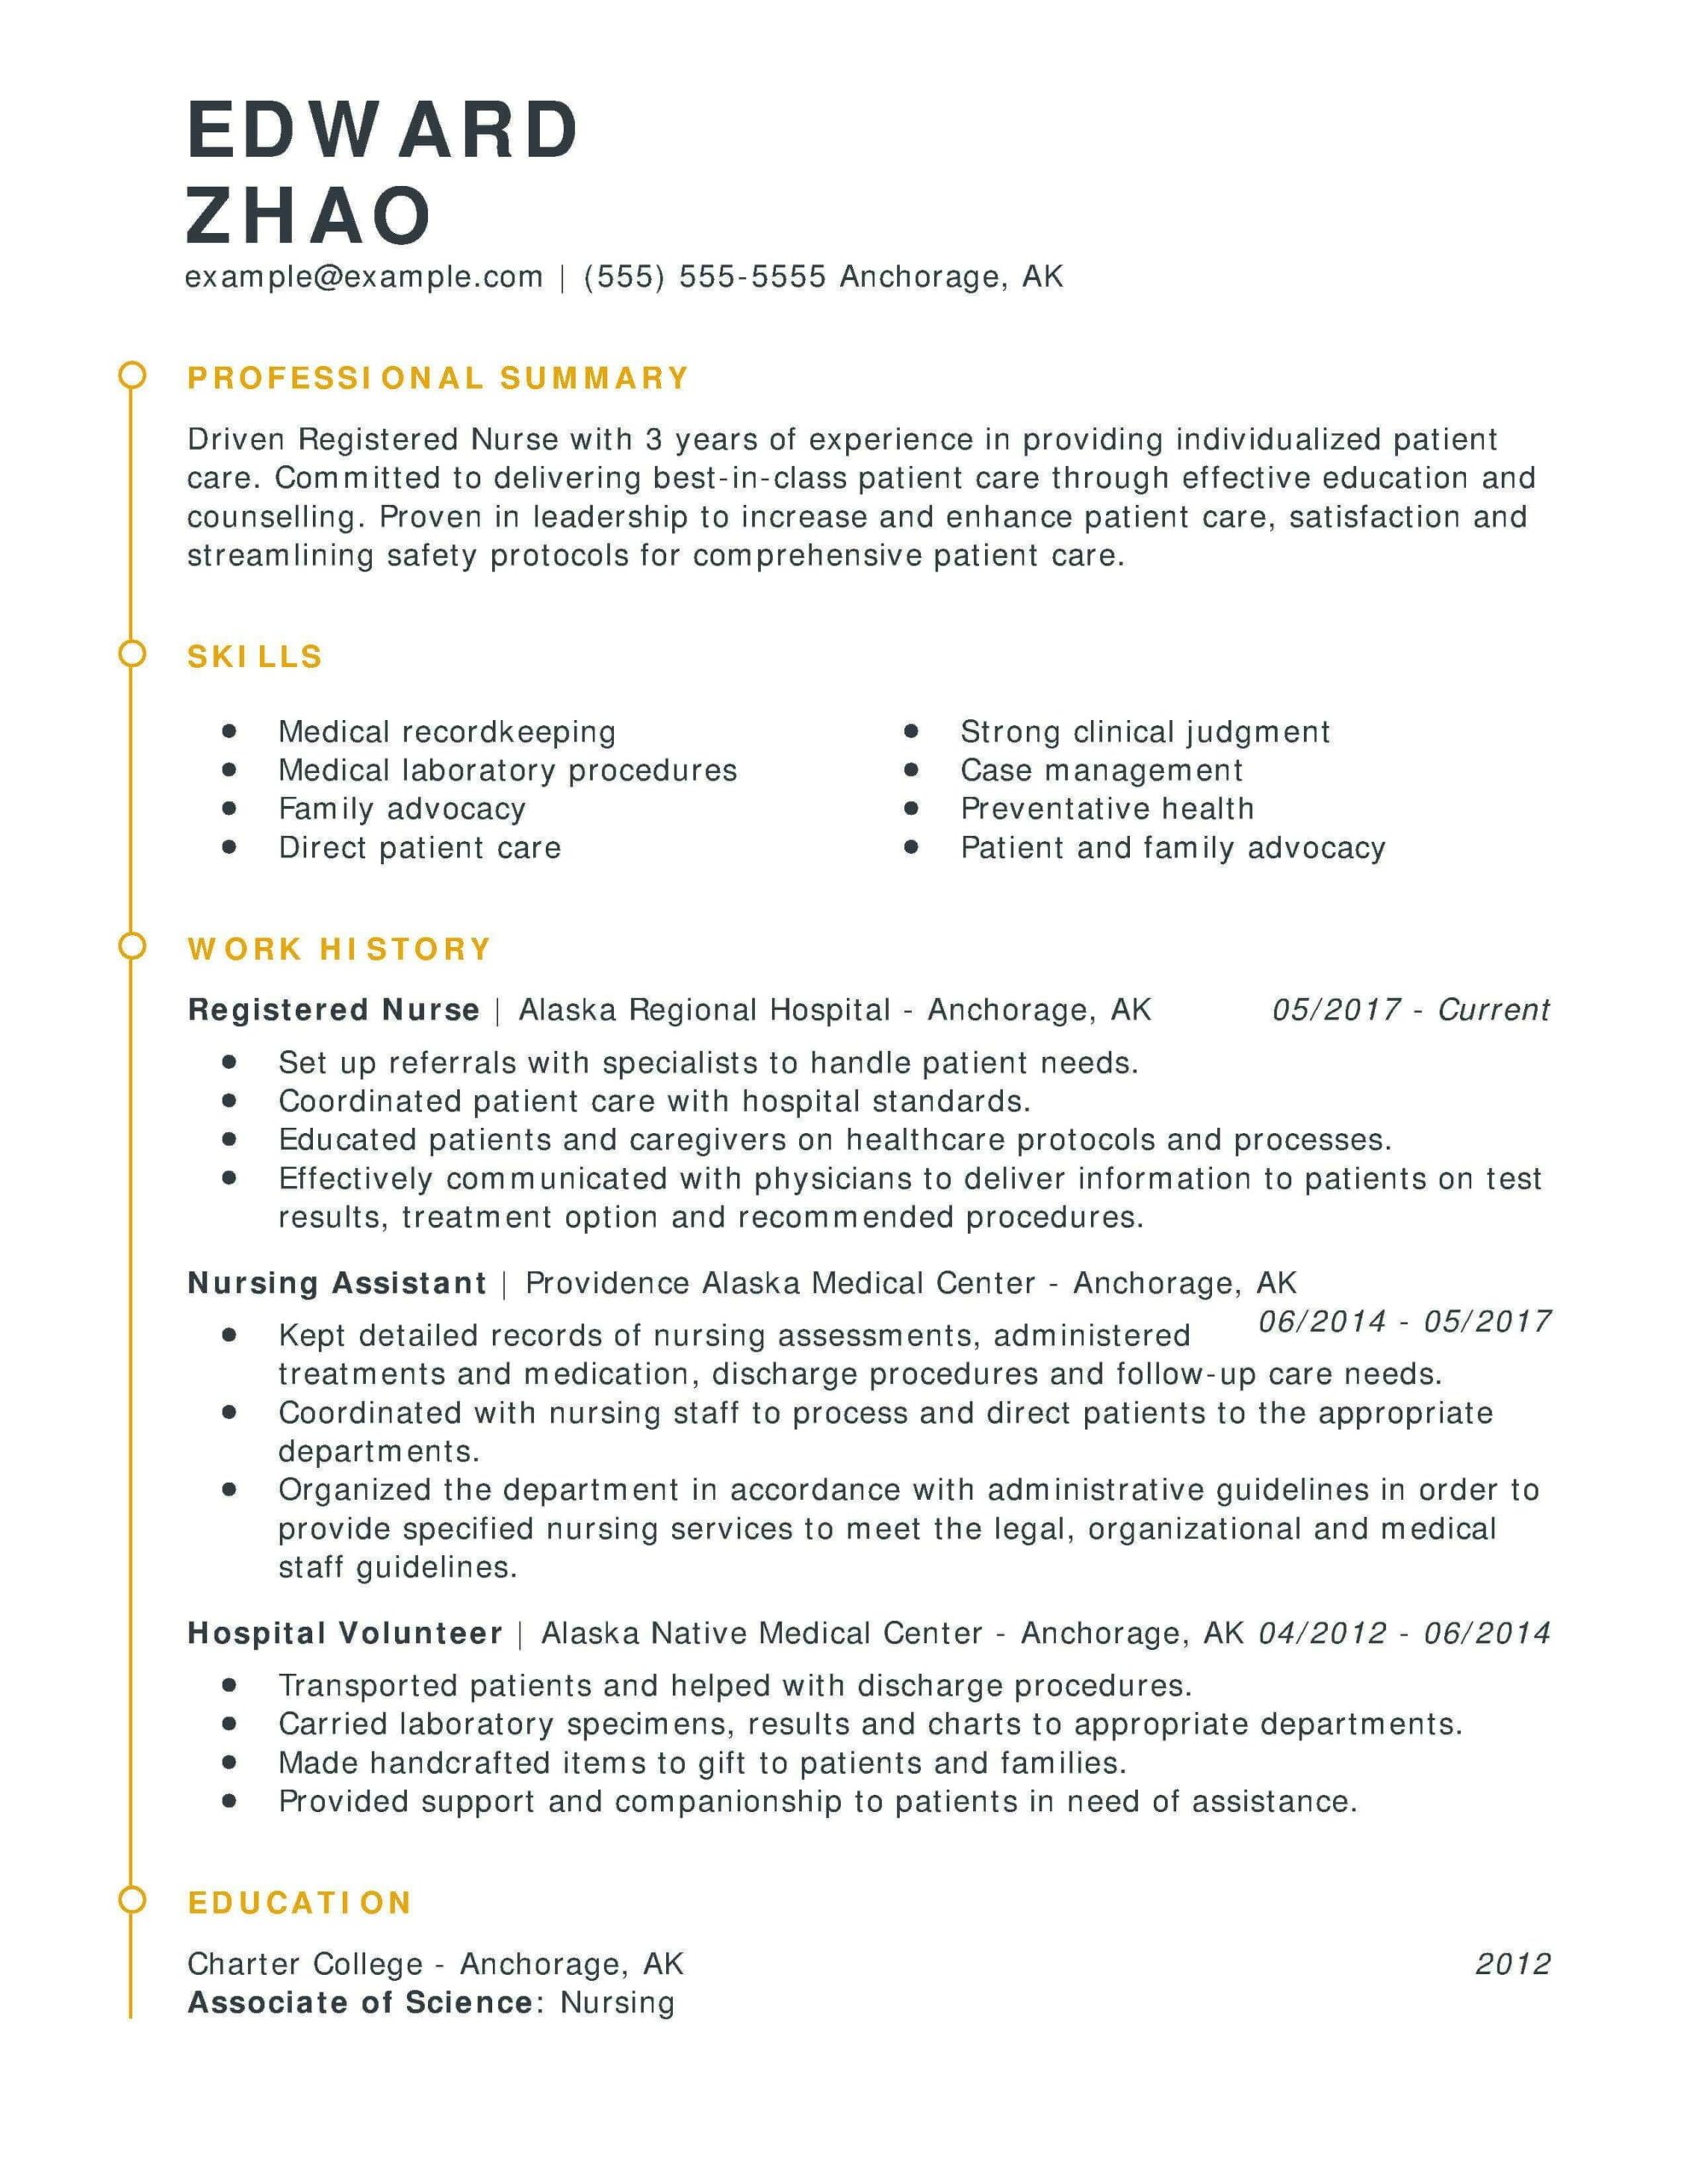 Whats A Good Summary For A Resume  salescv.info